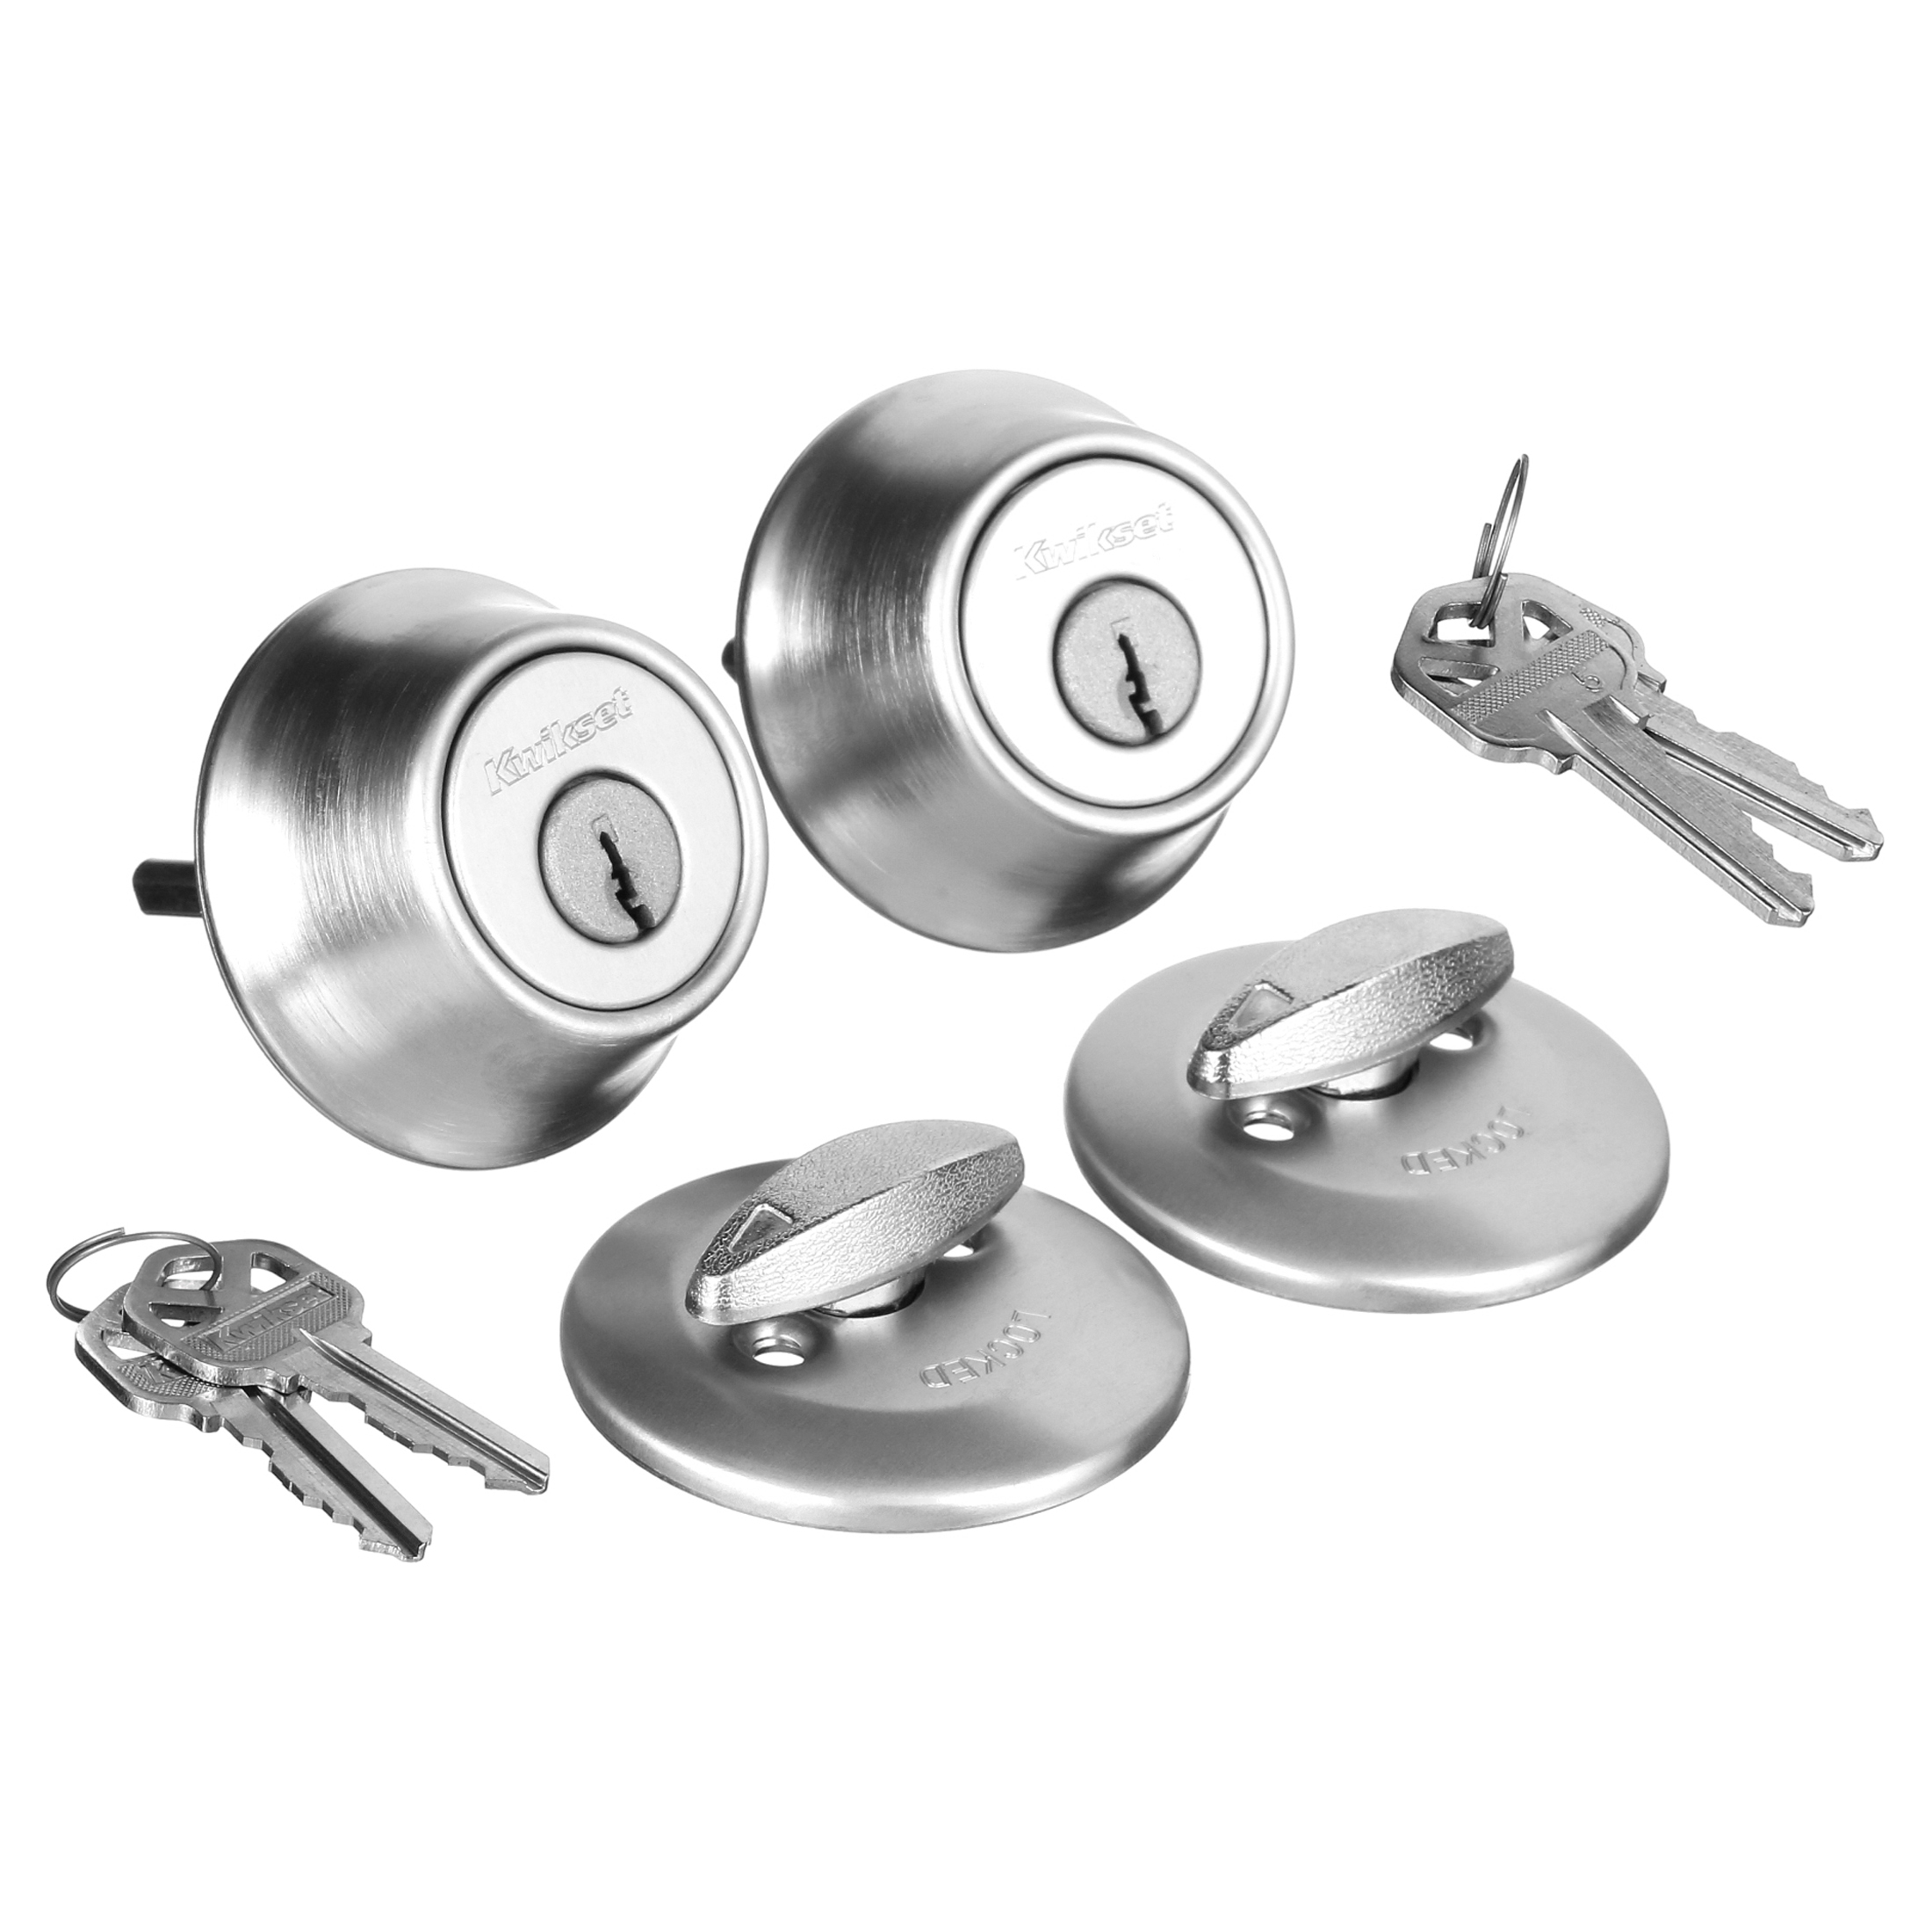 Kwikset 242 Tylo Keyed Entry Knob And Sgl Cyl Deadbolt Project Pack in SC 